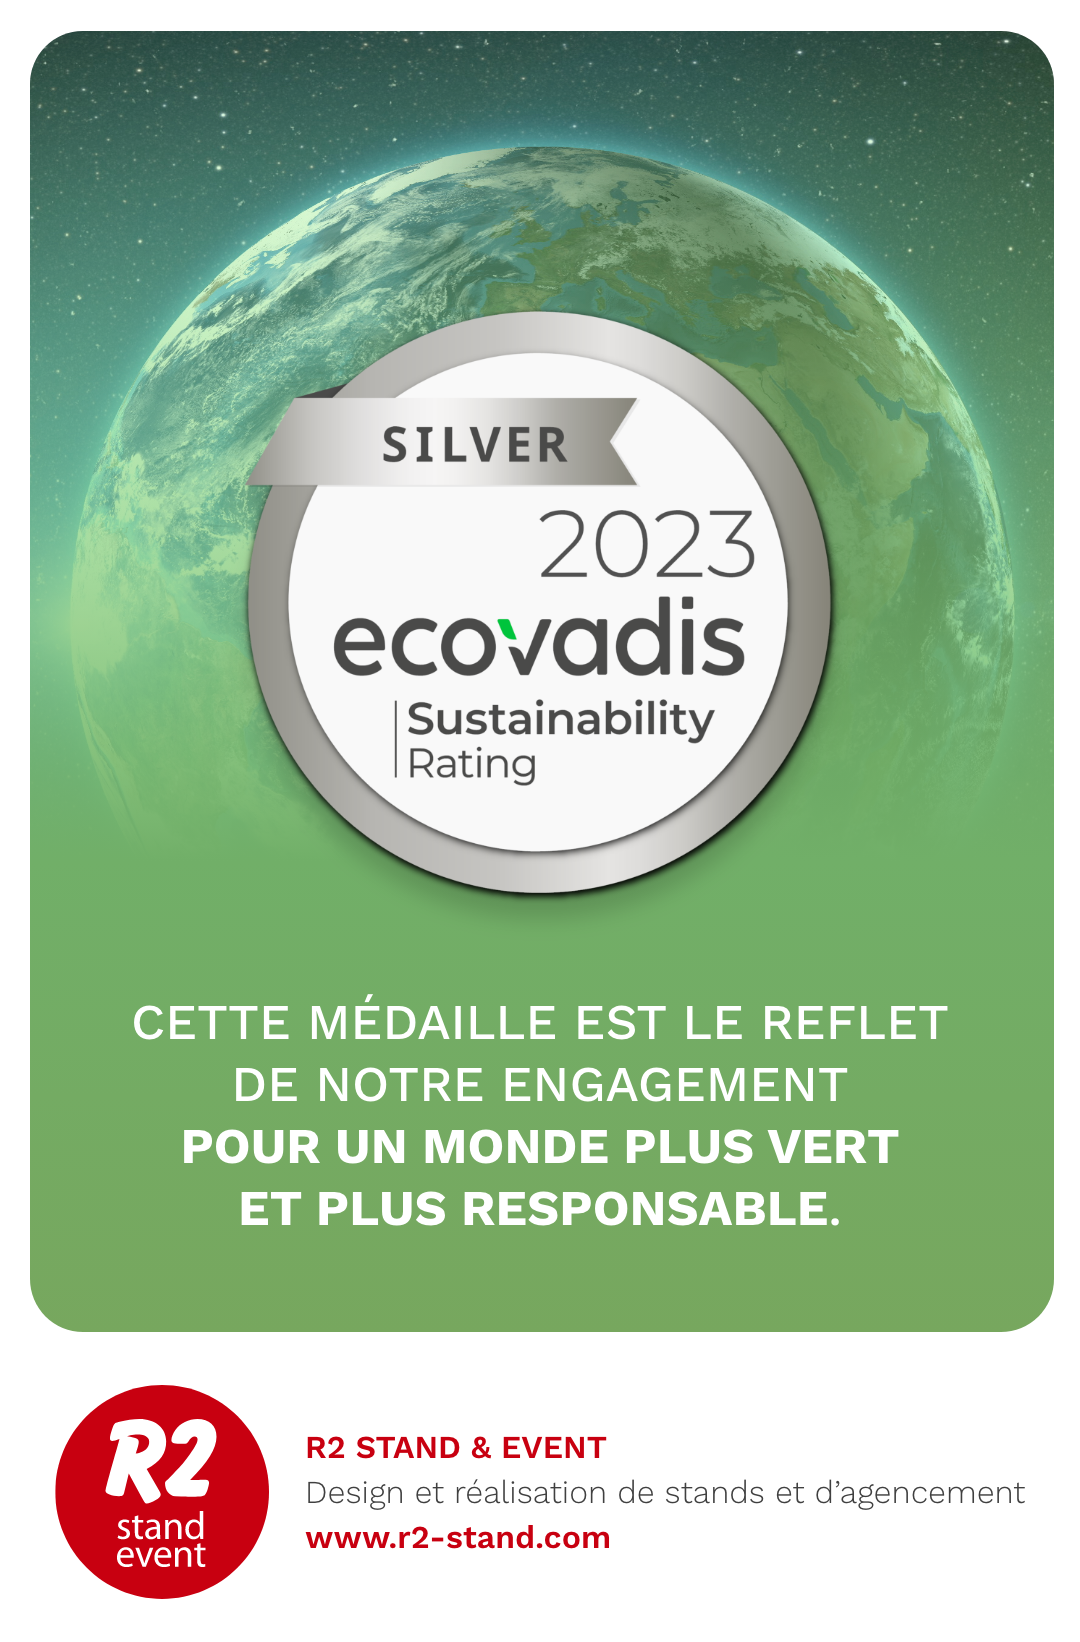 R2 STAND ET EVENT ECOVADIS SILVER